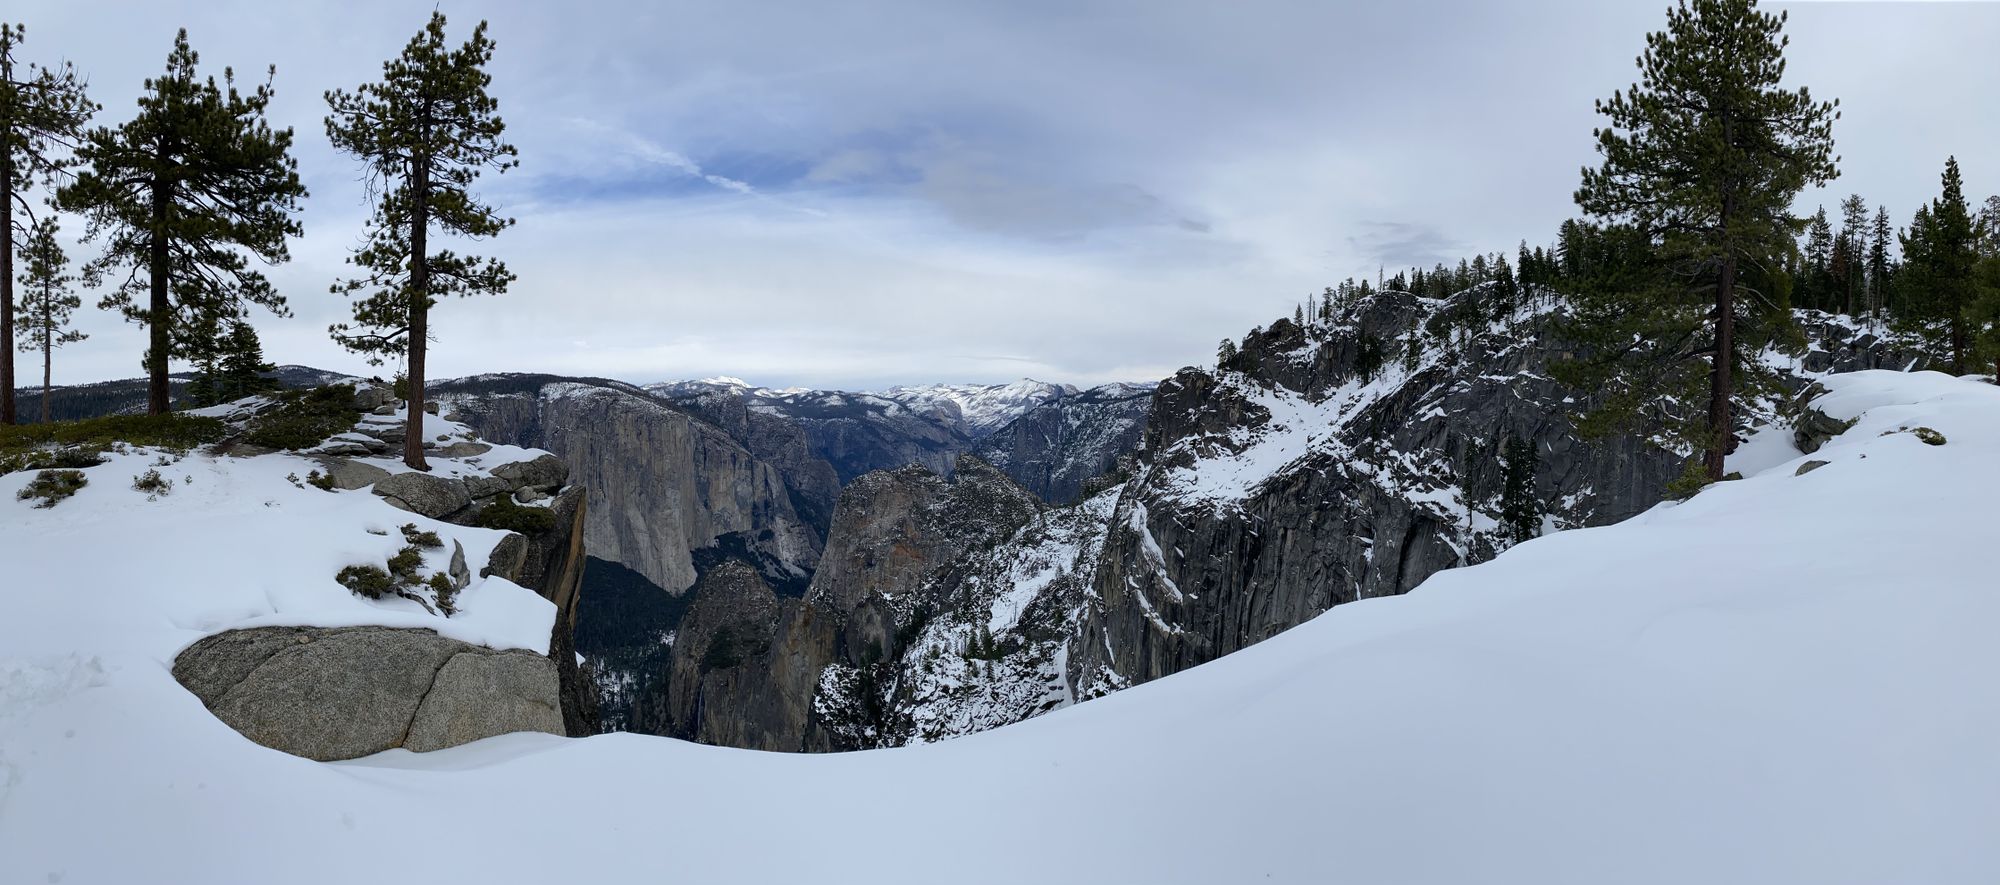 Snow Backpacking in Yosemite